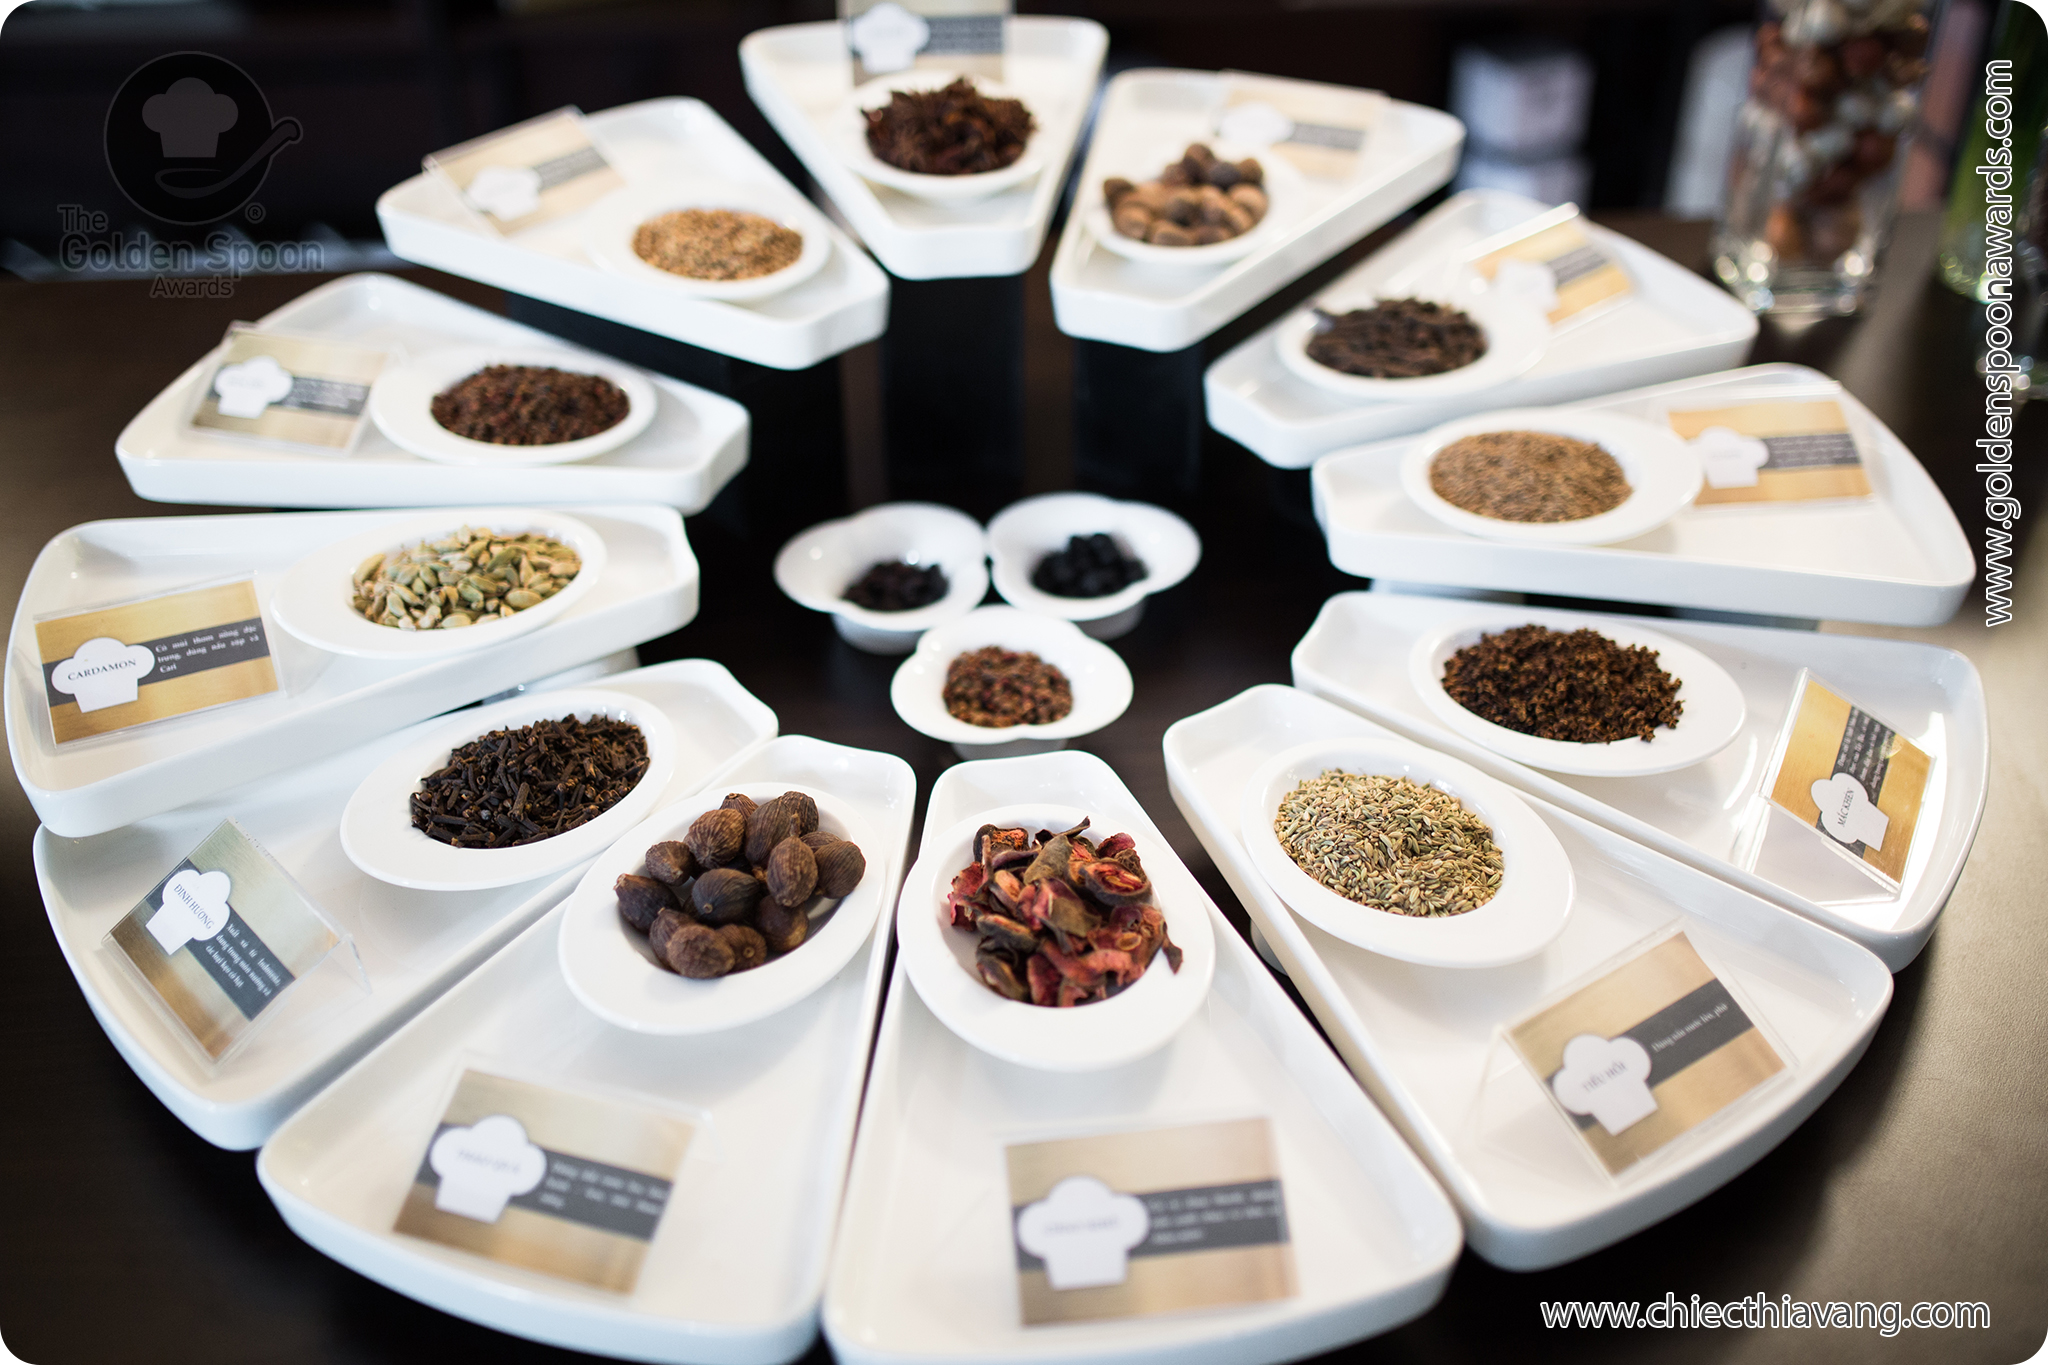 http://cms.chiecthiavang.com/Images/Uploaded/Share/2016/05/10/79aA-display-table-of-Vietnamese-spices-at-the-Golden-Spoon-contest.jpg